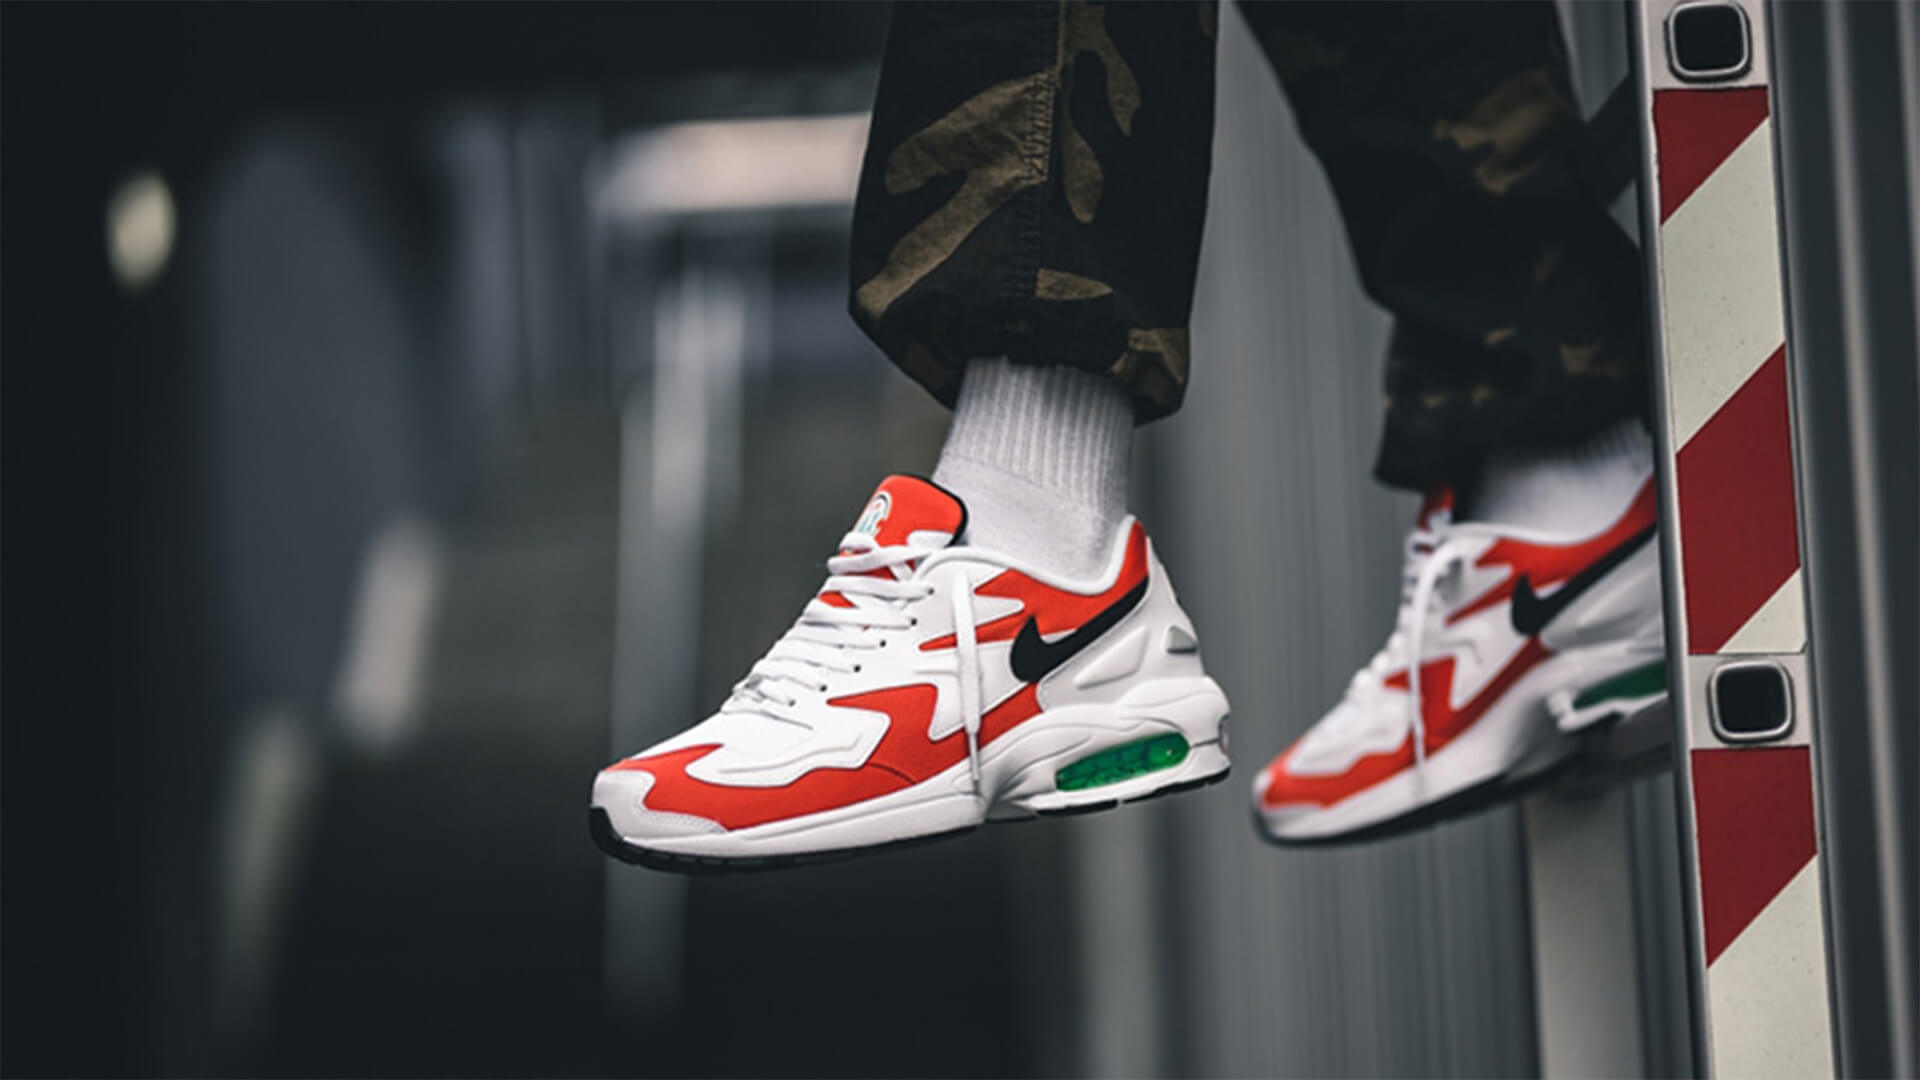 air max light red